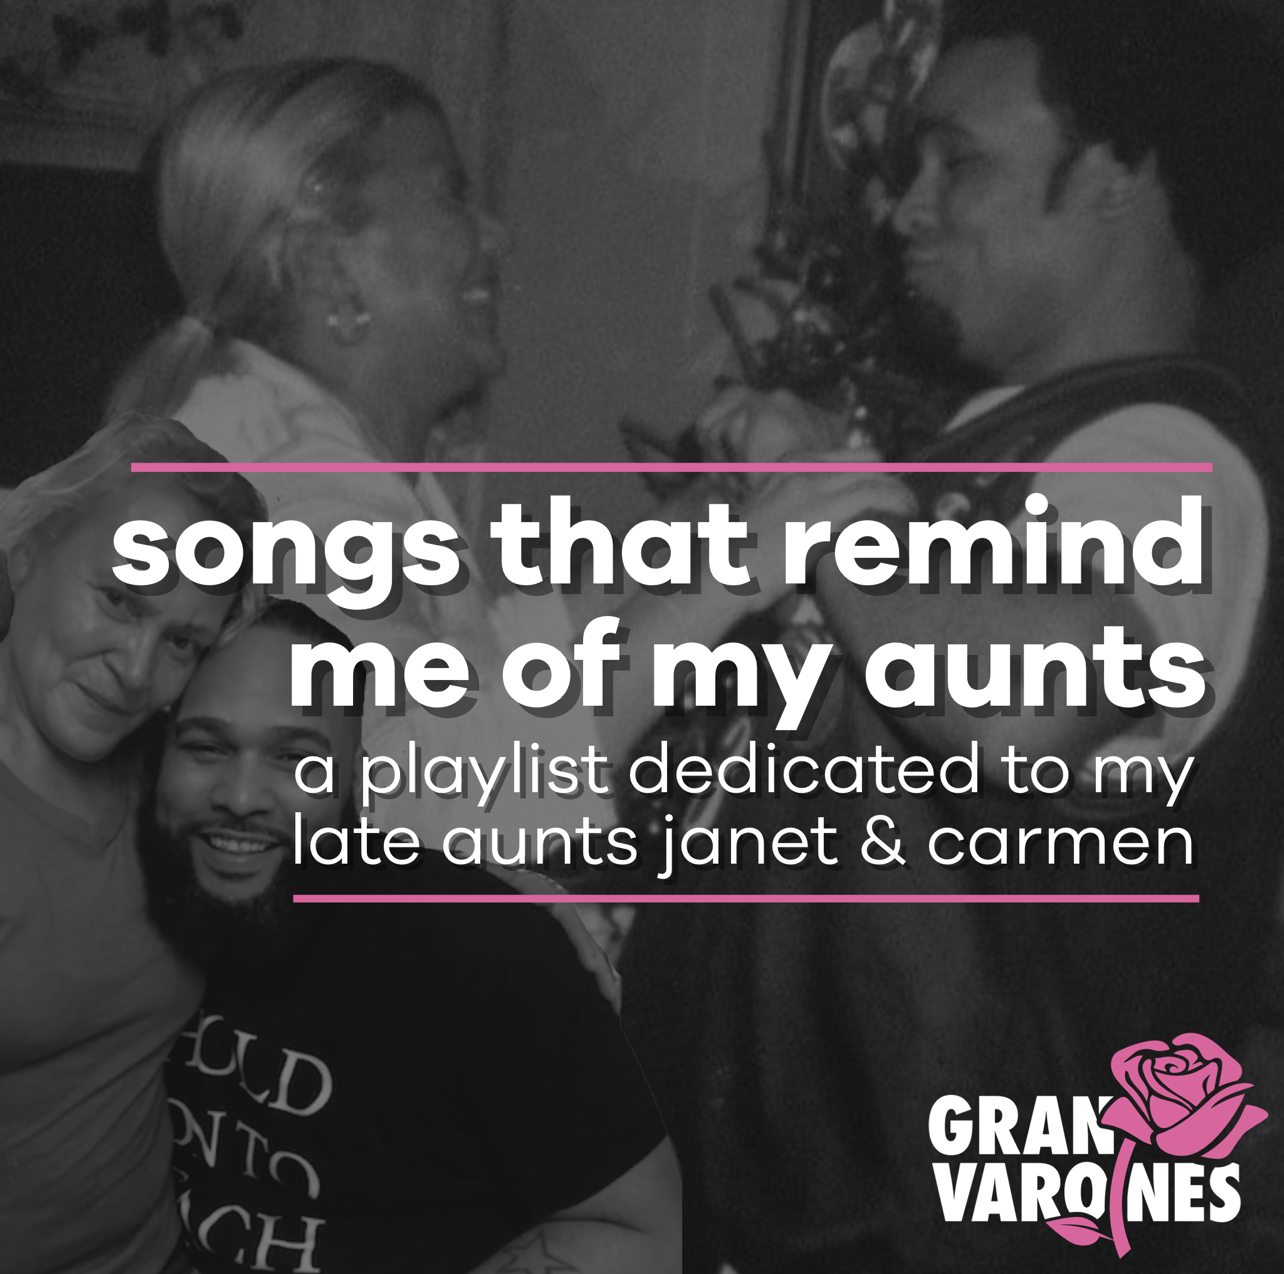 Playlist: Songs That Remind Me of My Aunts